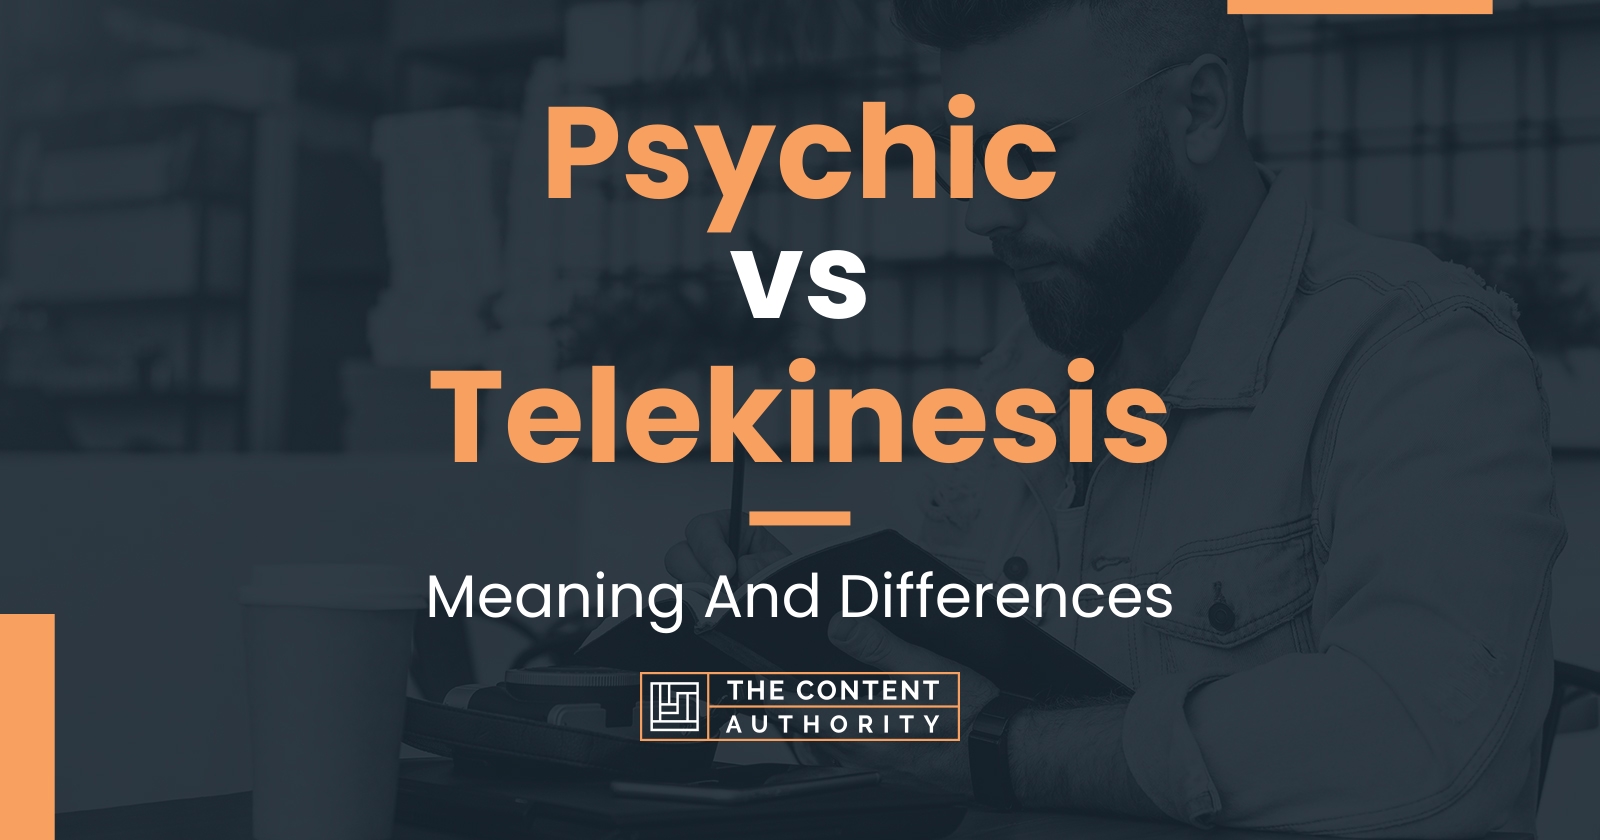 Psychic vs Telekinesis: Meaning And Differences